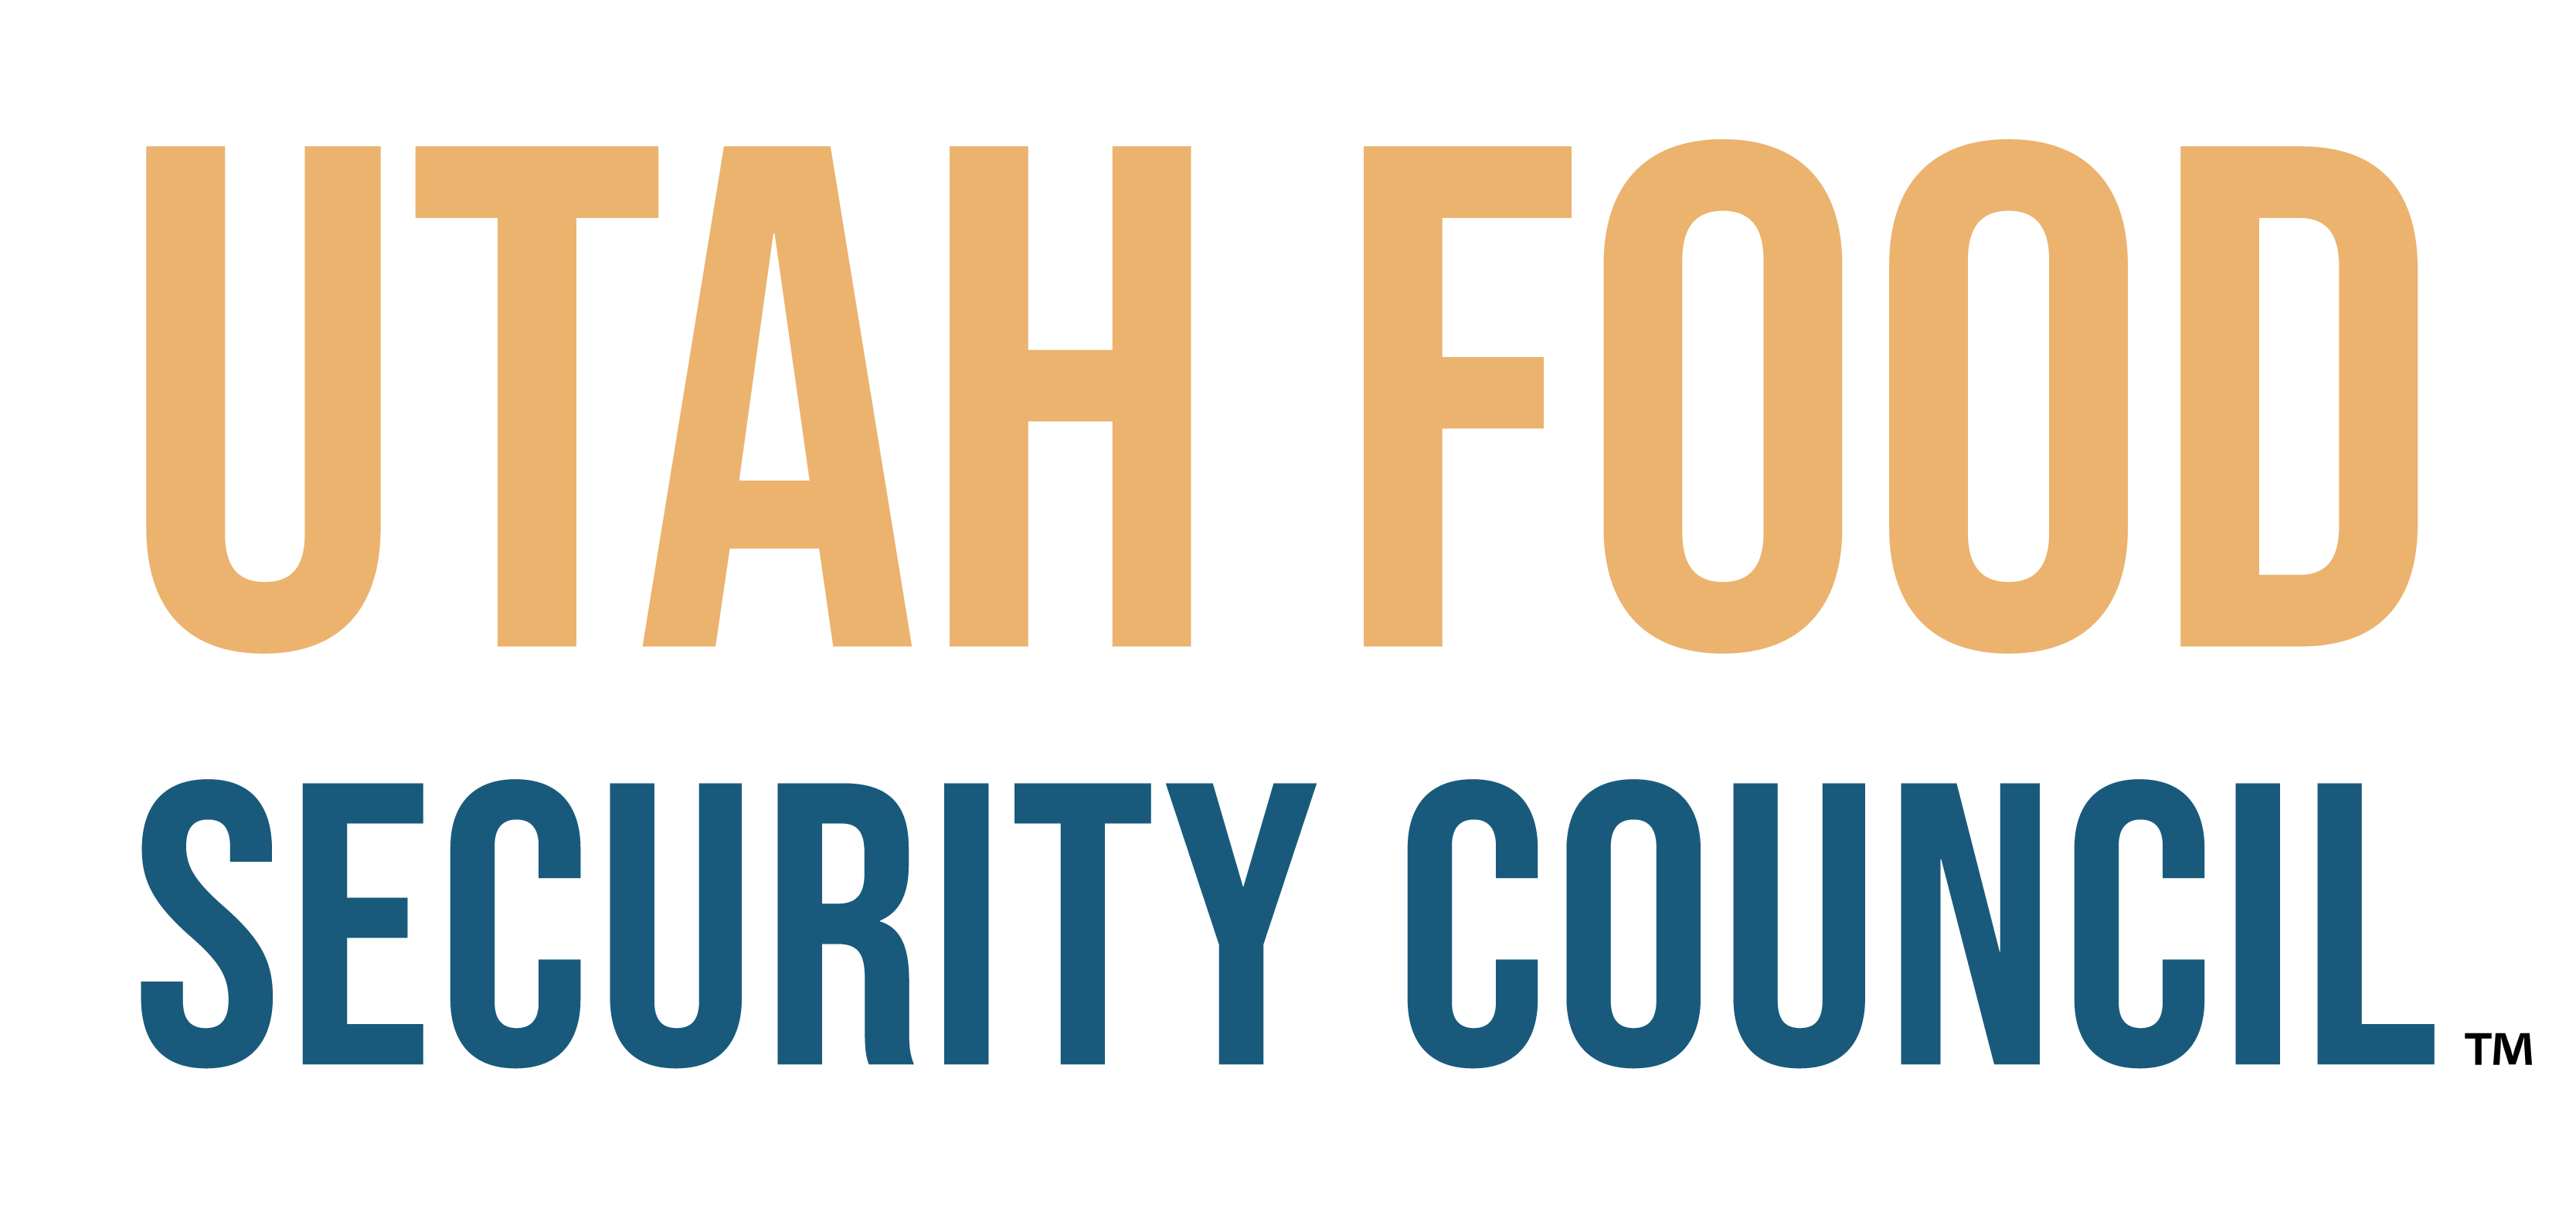 Food Security Council Type Font